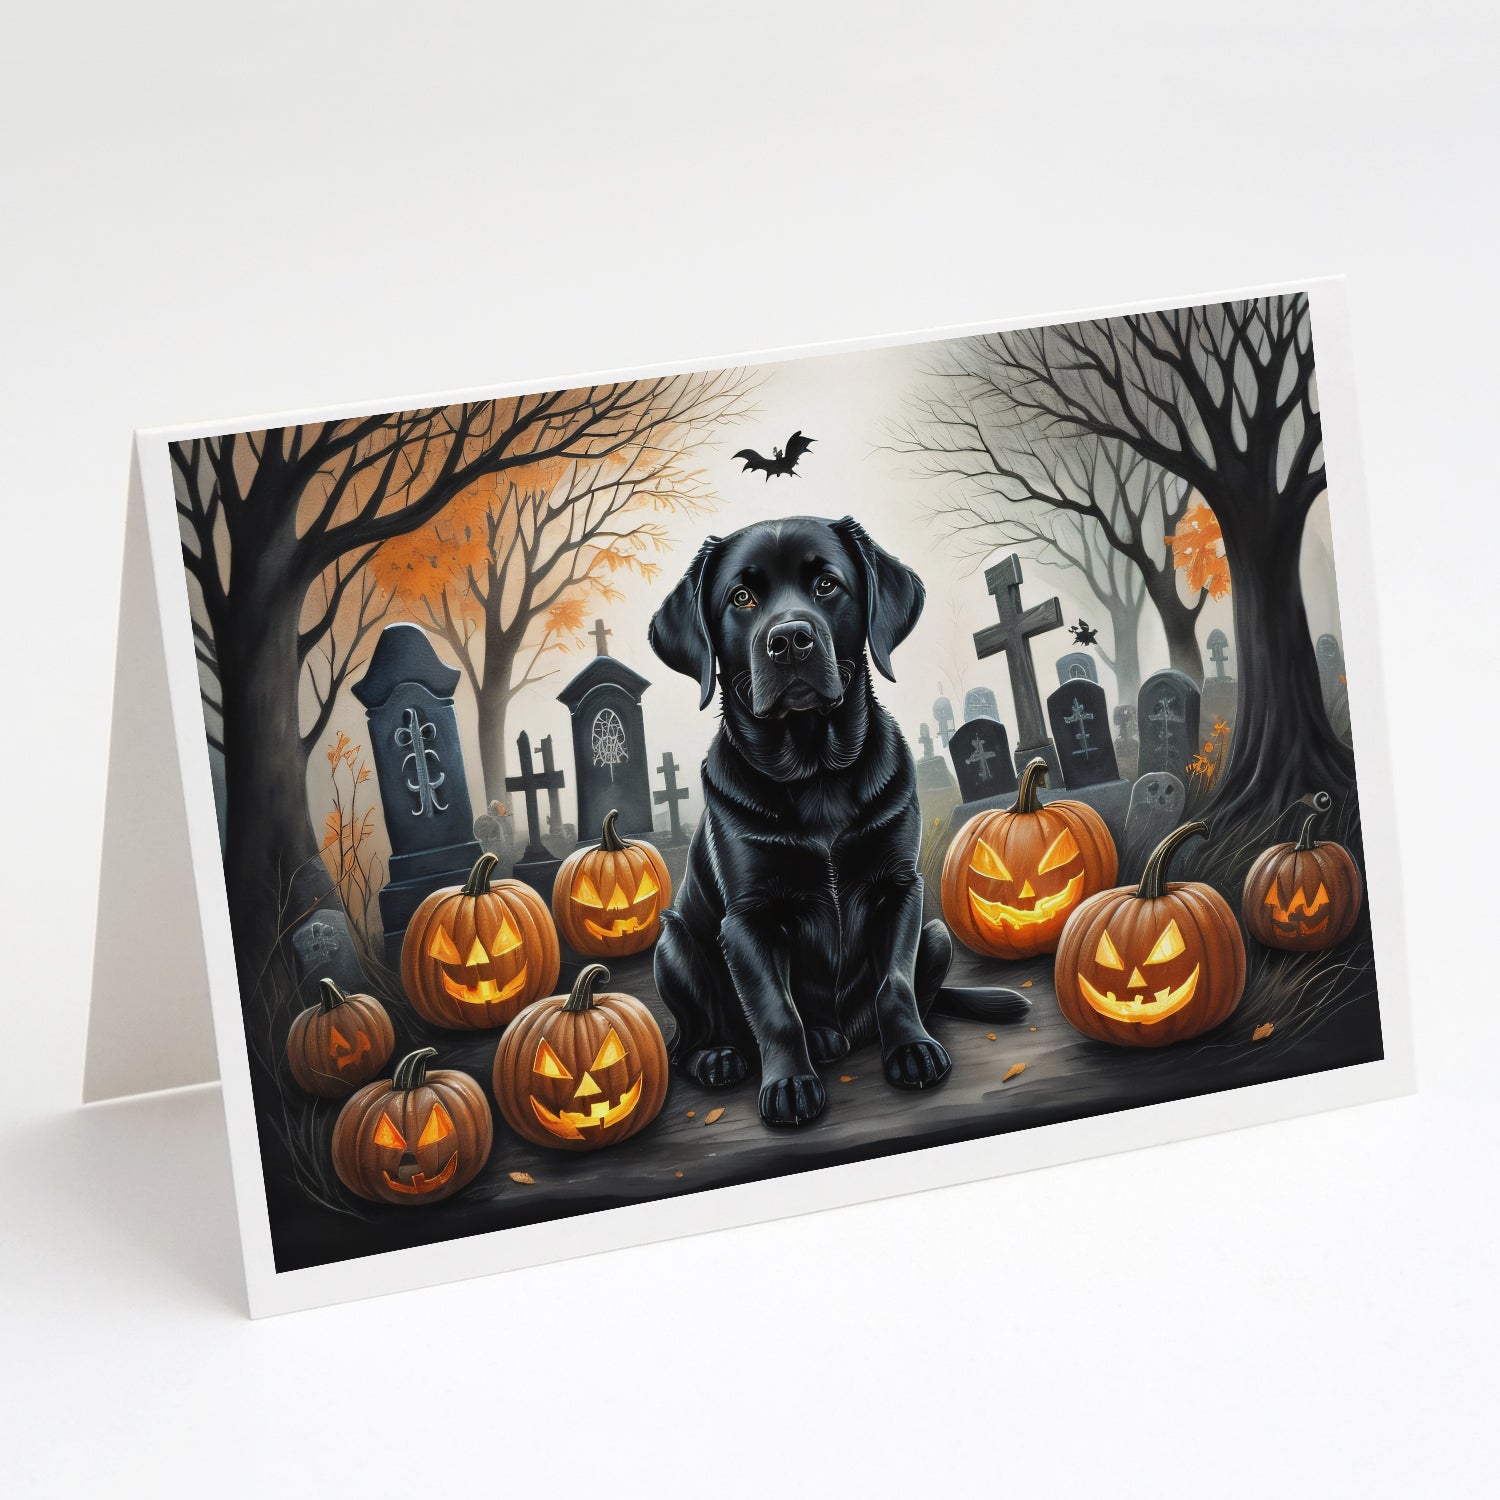 Buy this Black Labrador Retriever Spooky Halloween Greeting Cards and Envelopes Pack of 8